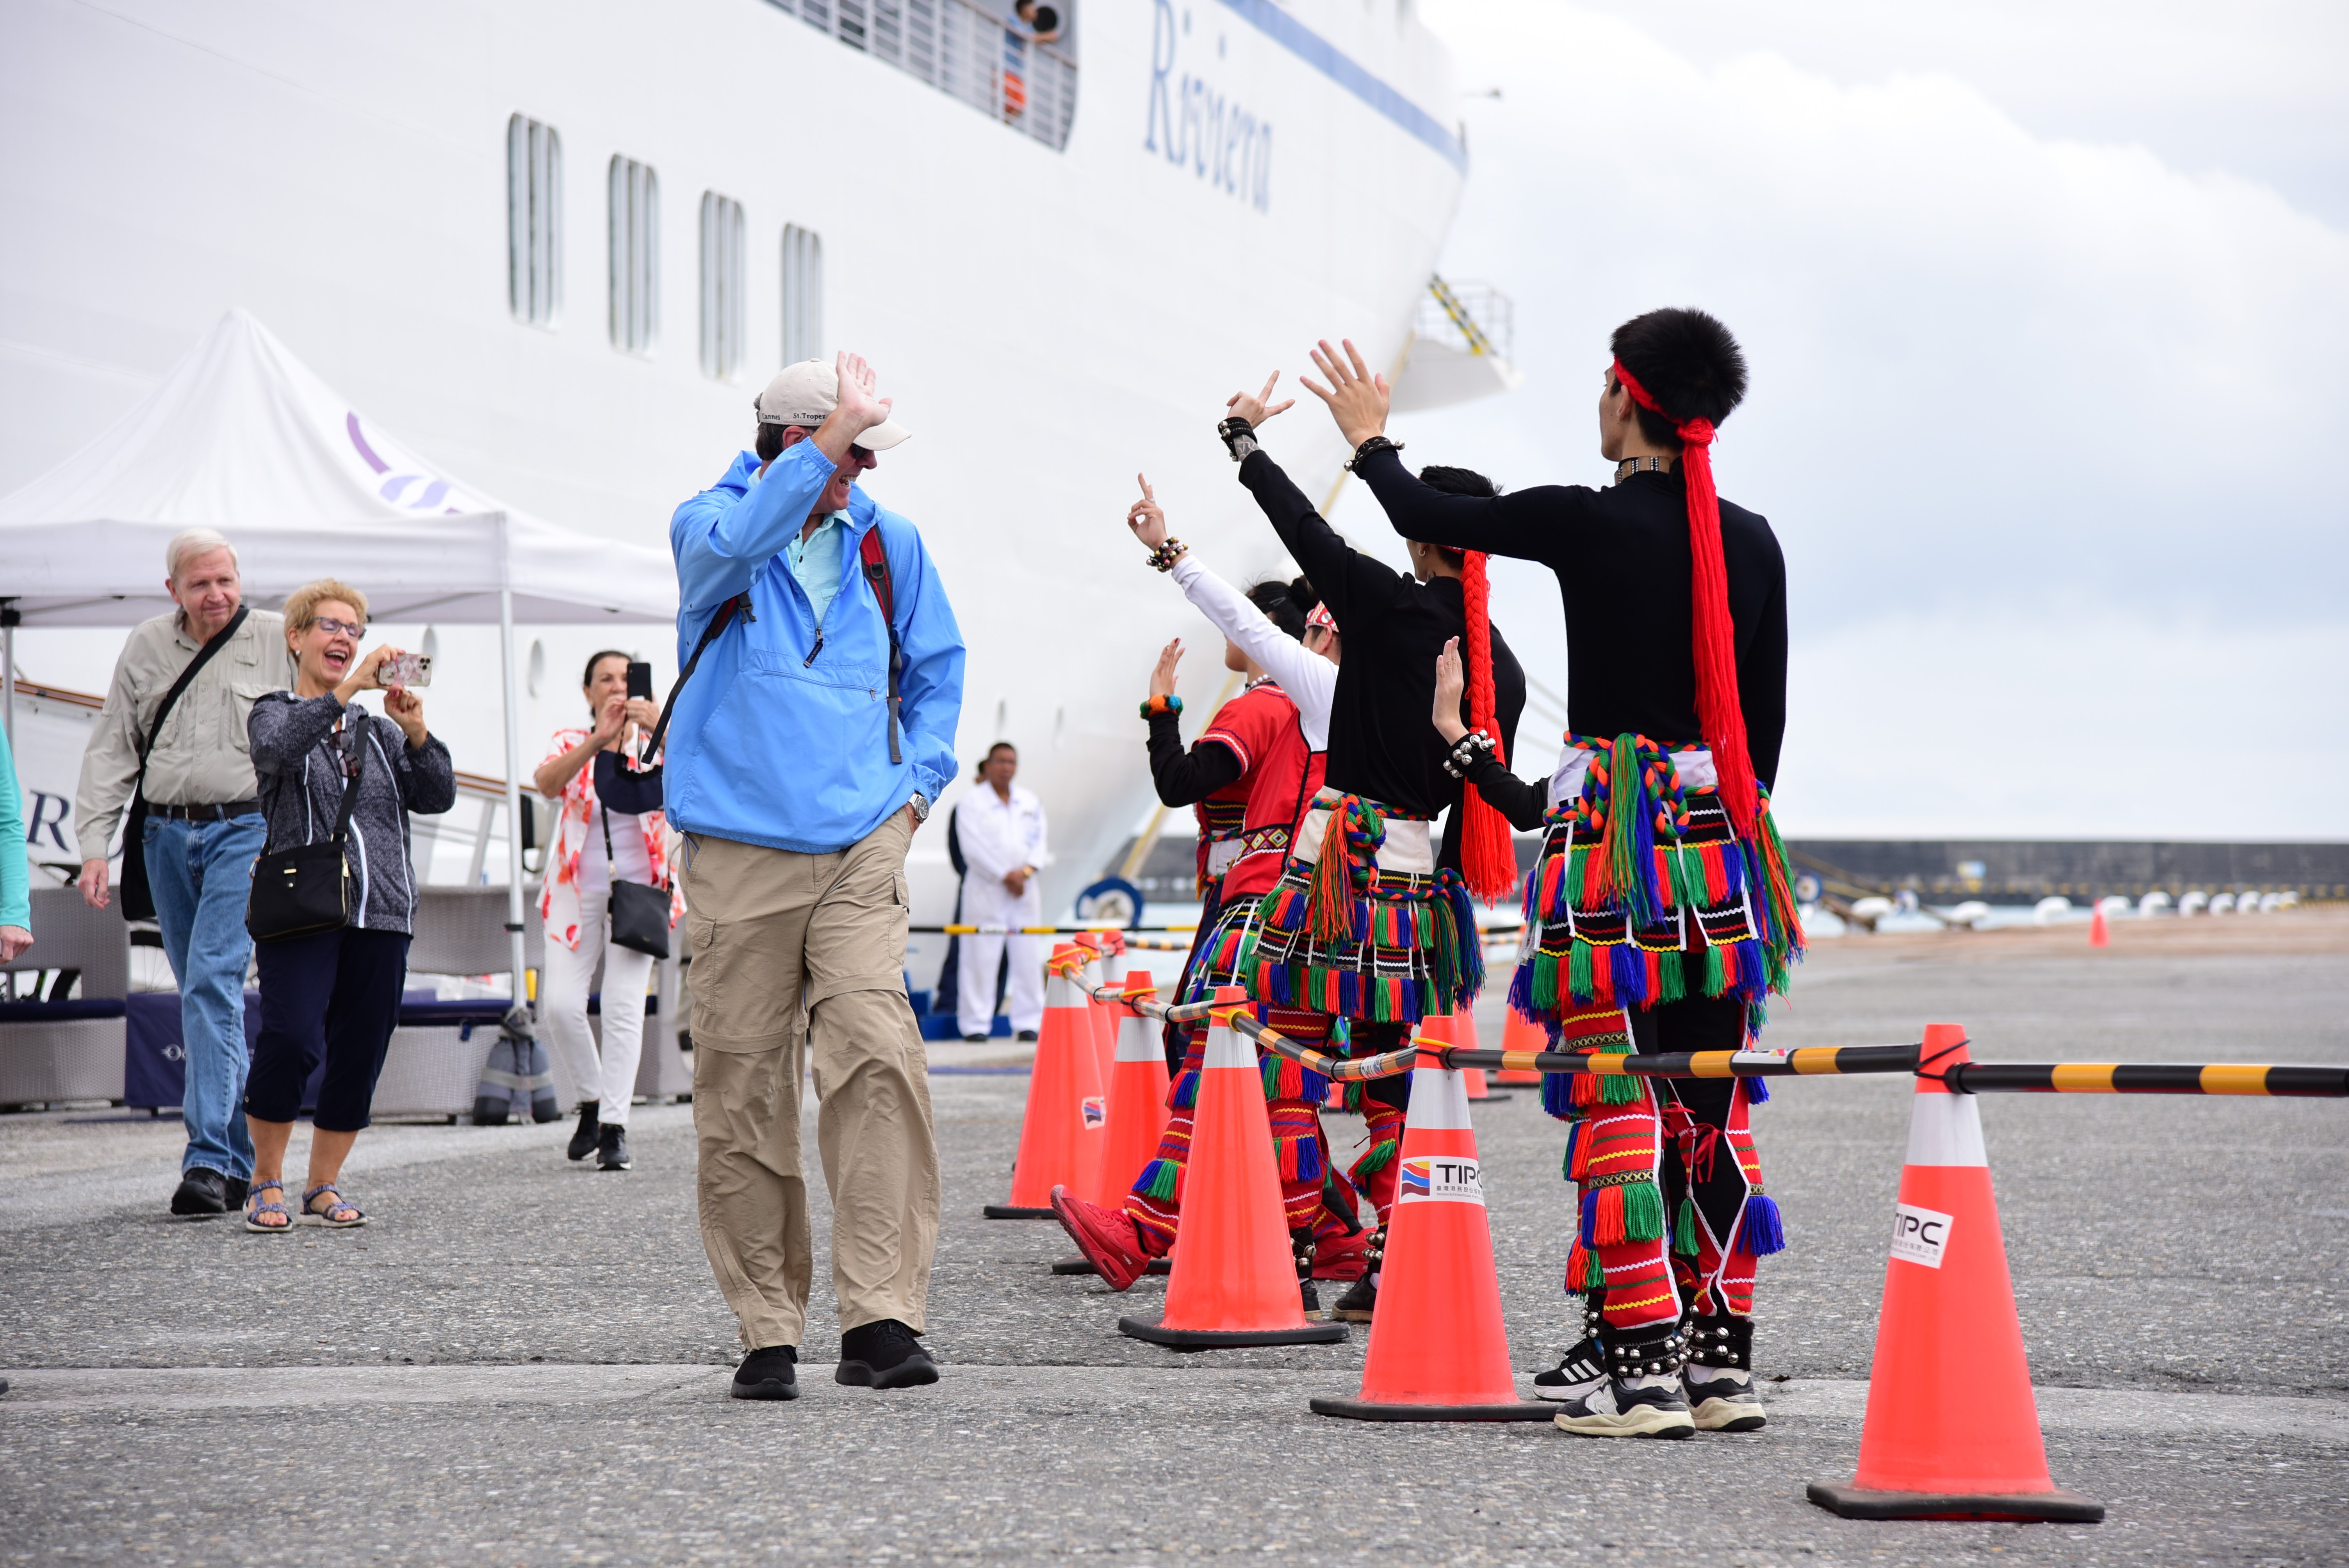 Image 2. Taiwanese Austronesian dancers join in the festivities welcoming MS Riviera’s first visit to Port of Hualien